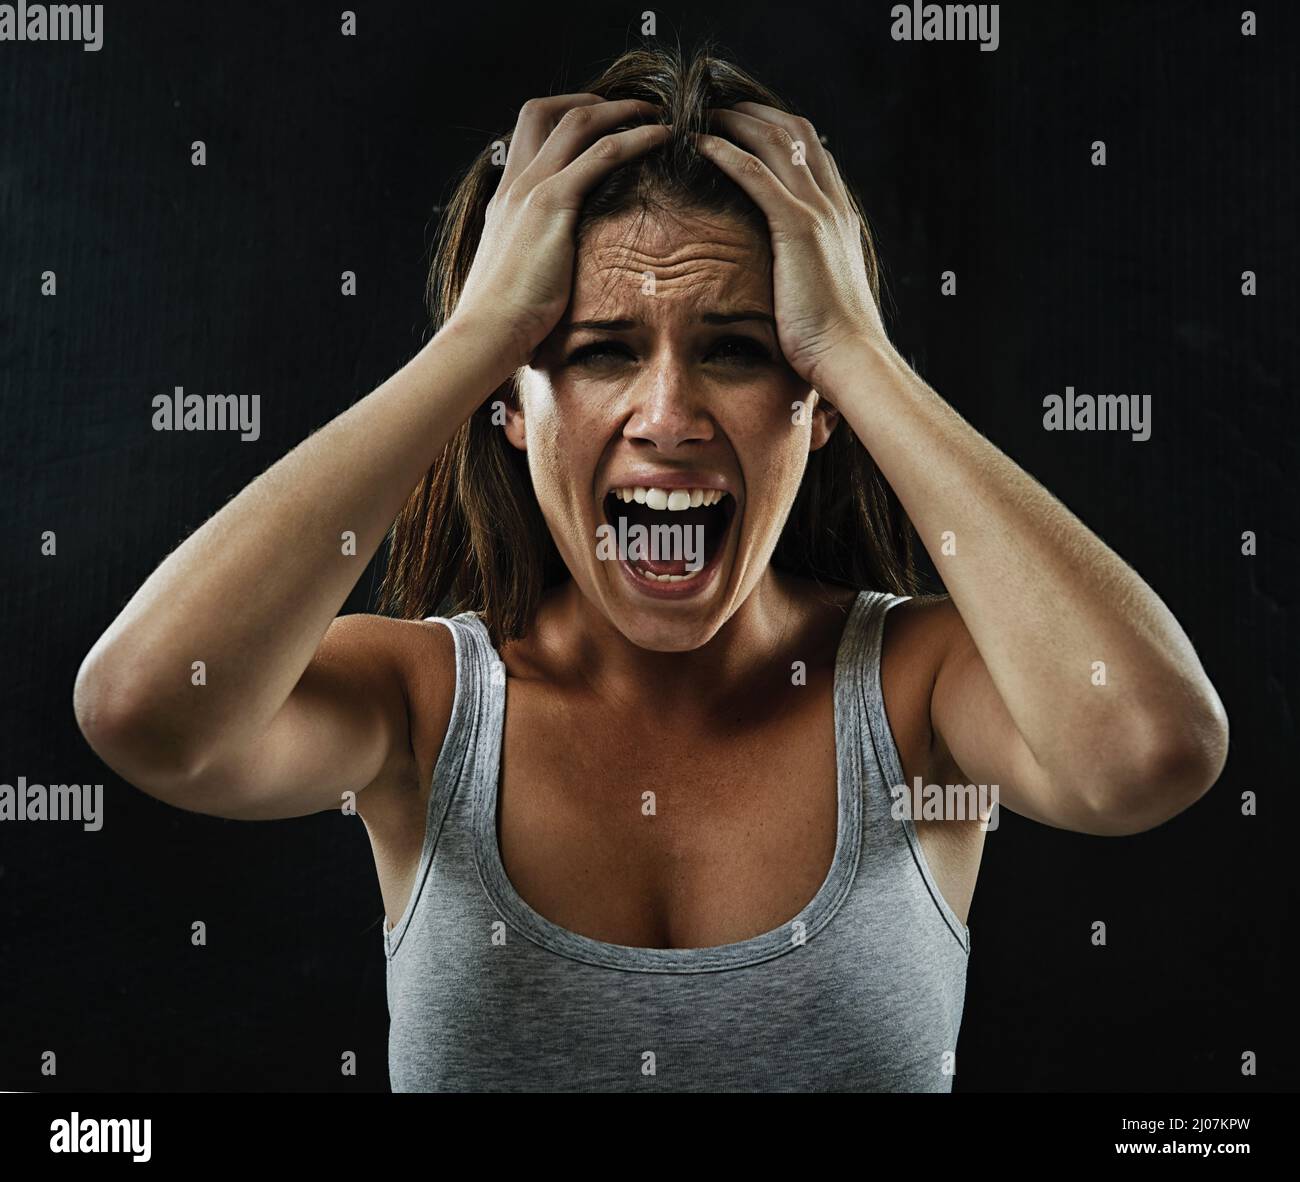 Make it go away. A young woman screaming uncontrollably while isolated on a black background. Stock Photo